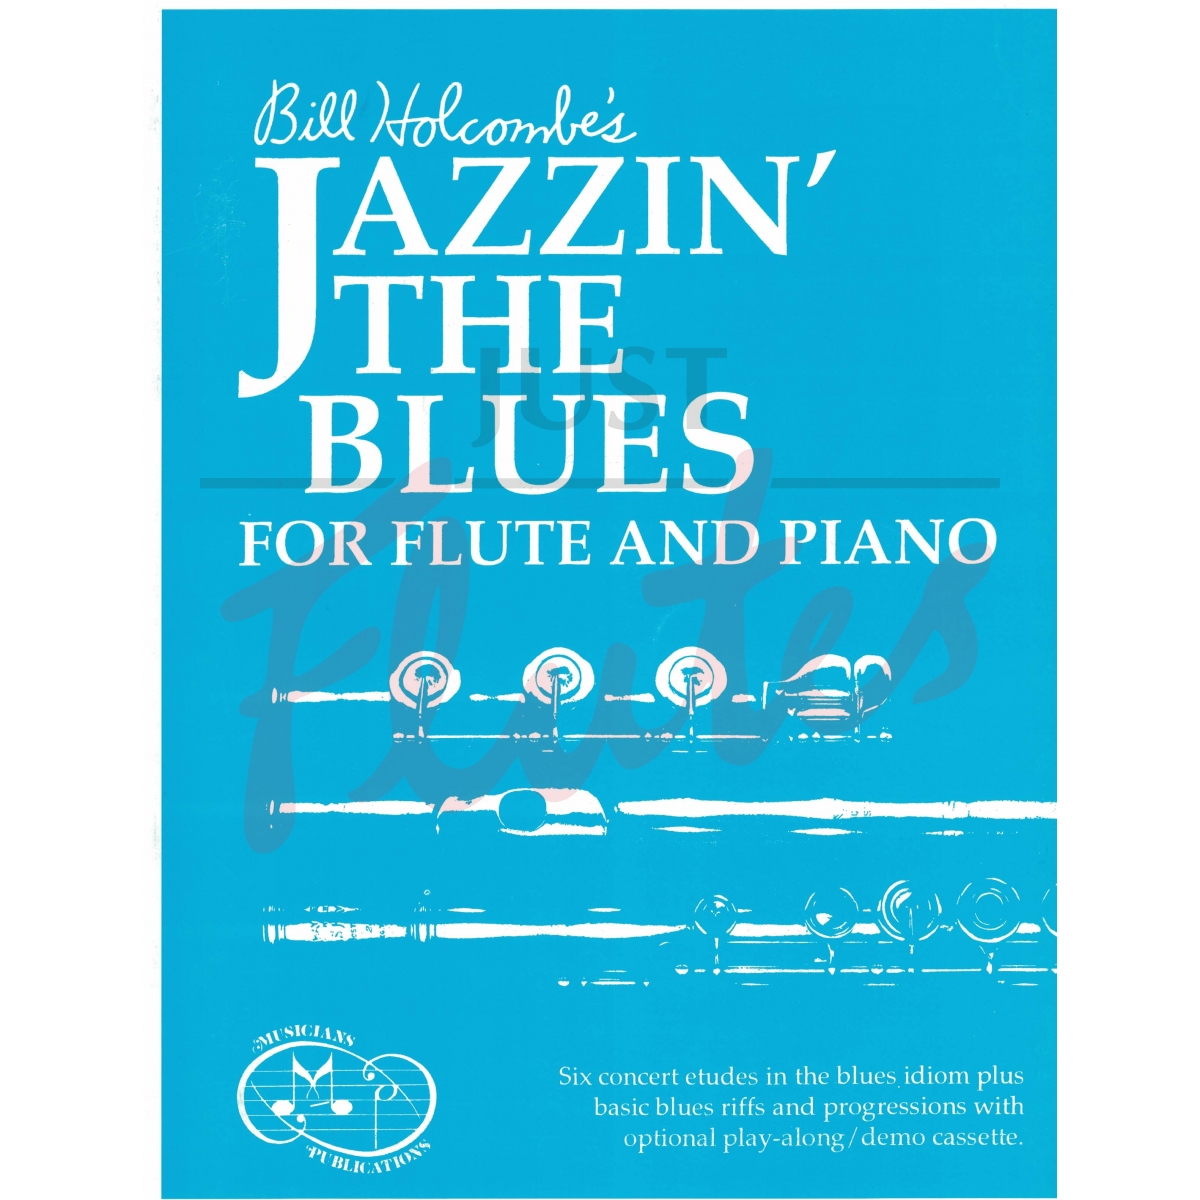 Jazzin' the Blues for Flute and Piano